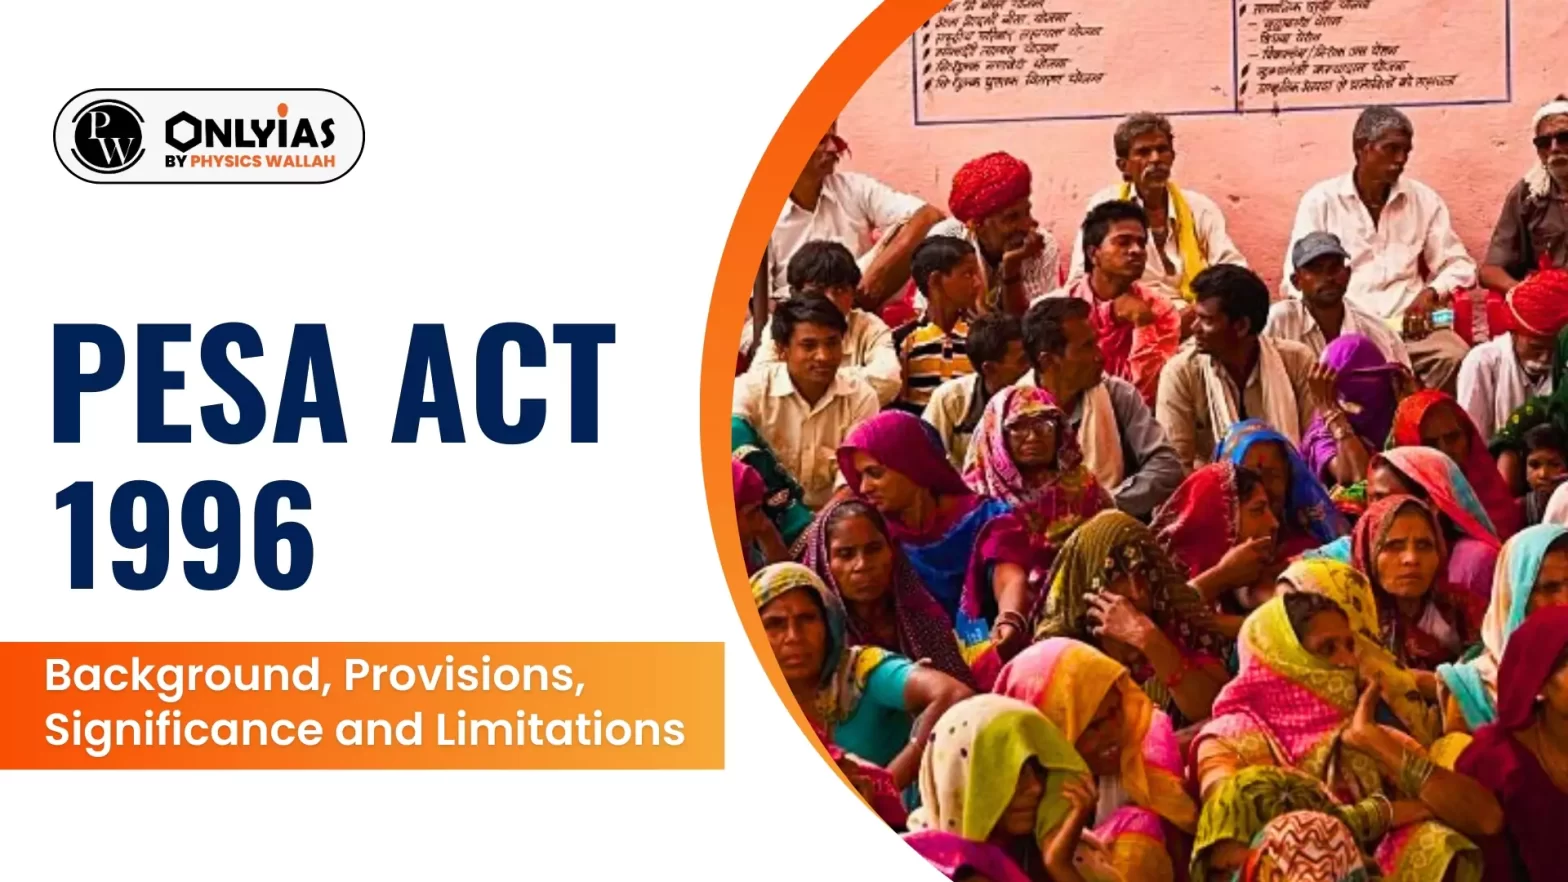 PESA ACT 1996: Background, Provisions, Significance and Limitations